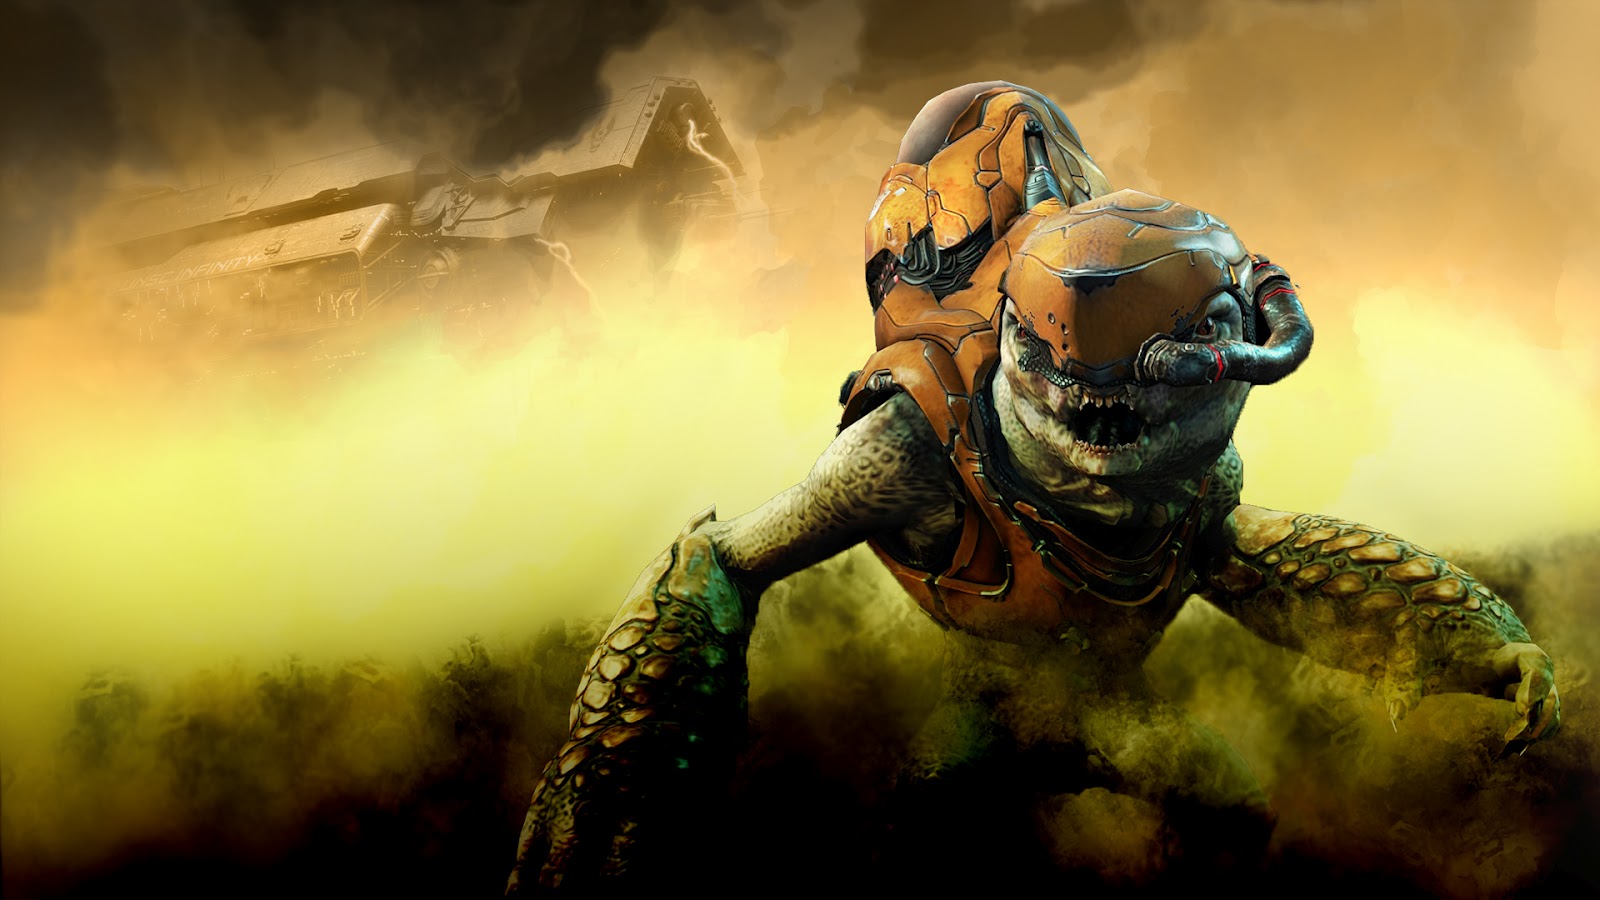 Halo 4 Anyone A Collection of Halo 4 Wall Papers C Town Gaming 1600x900